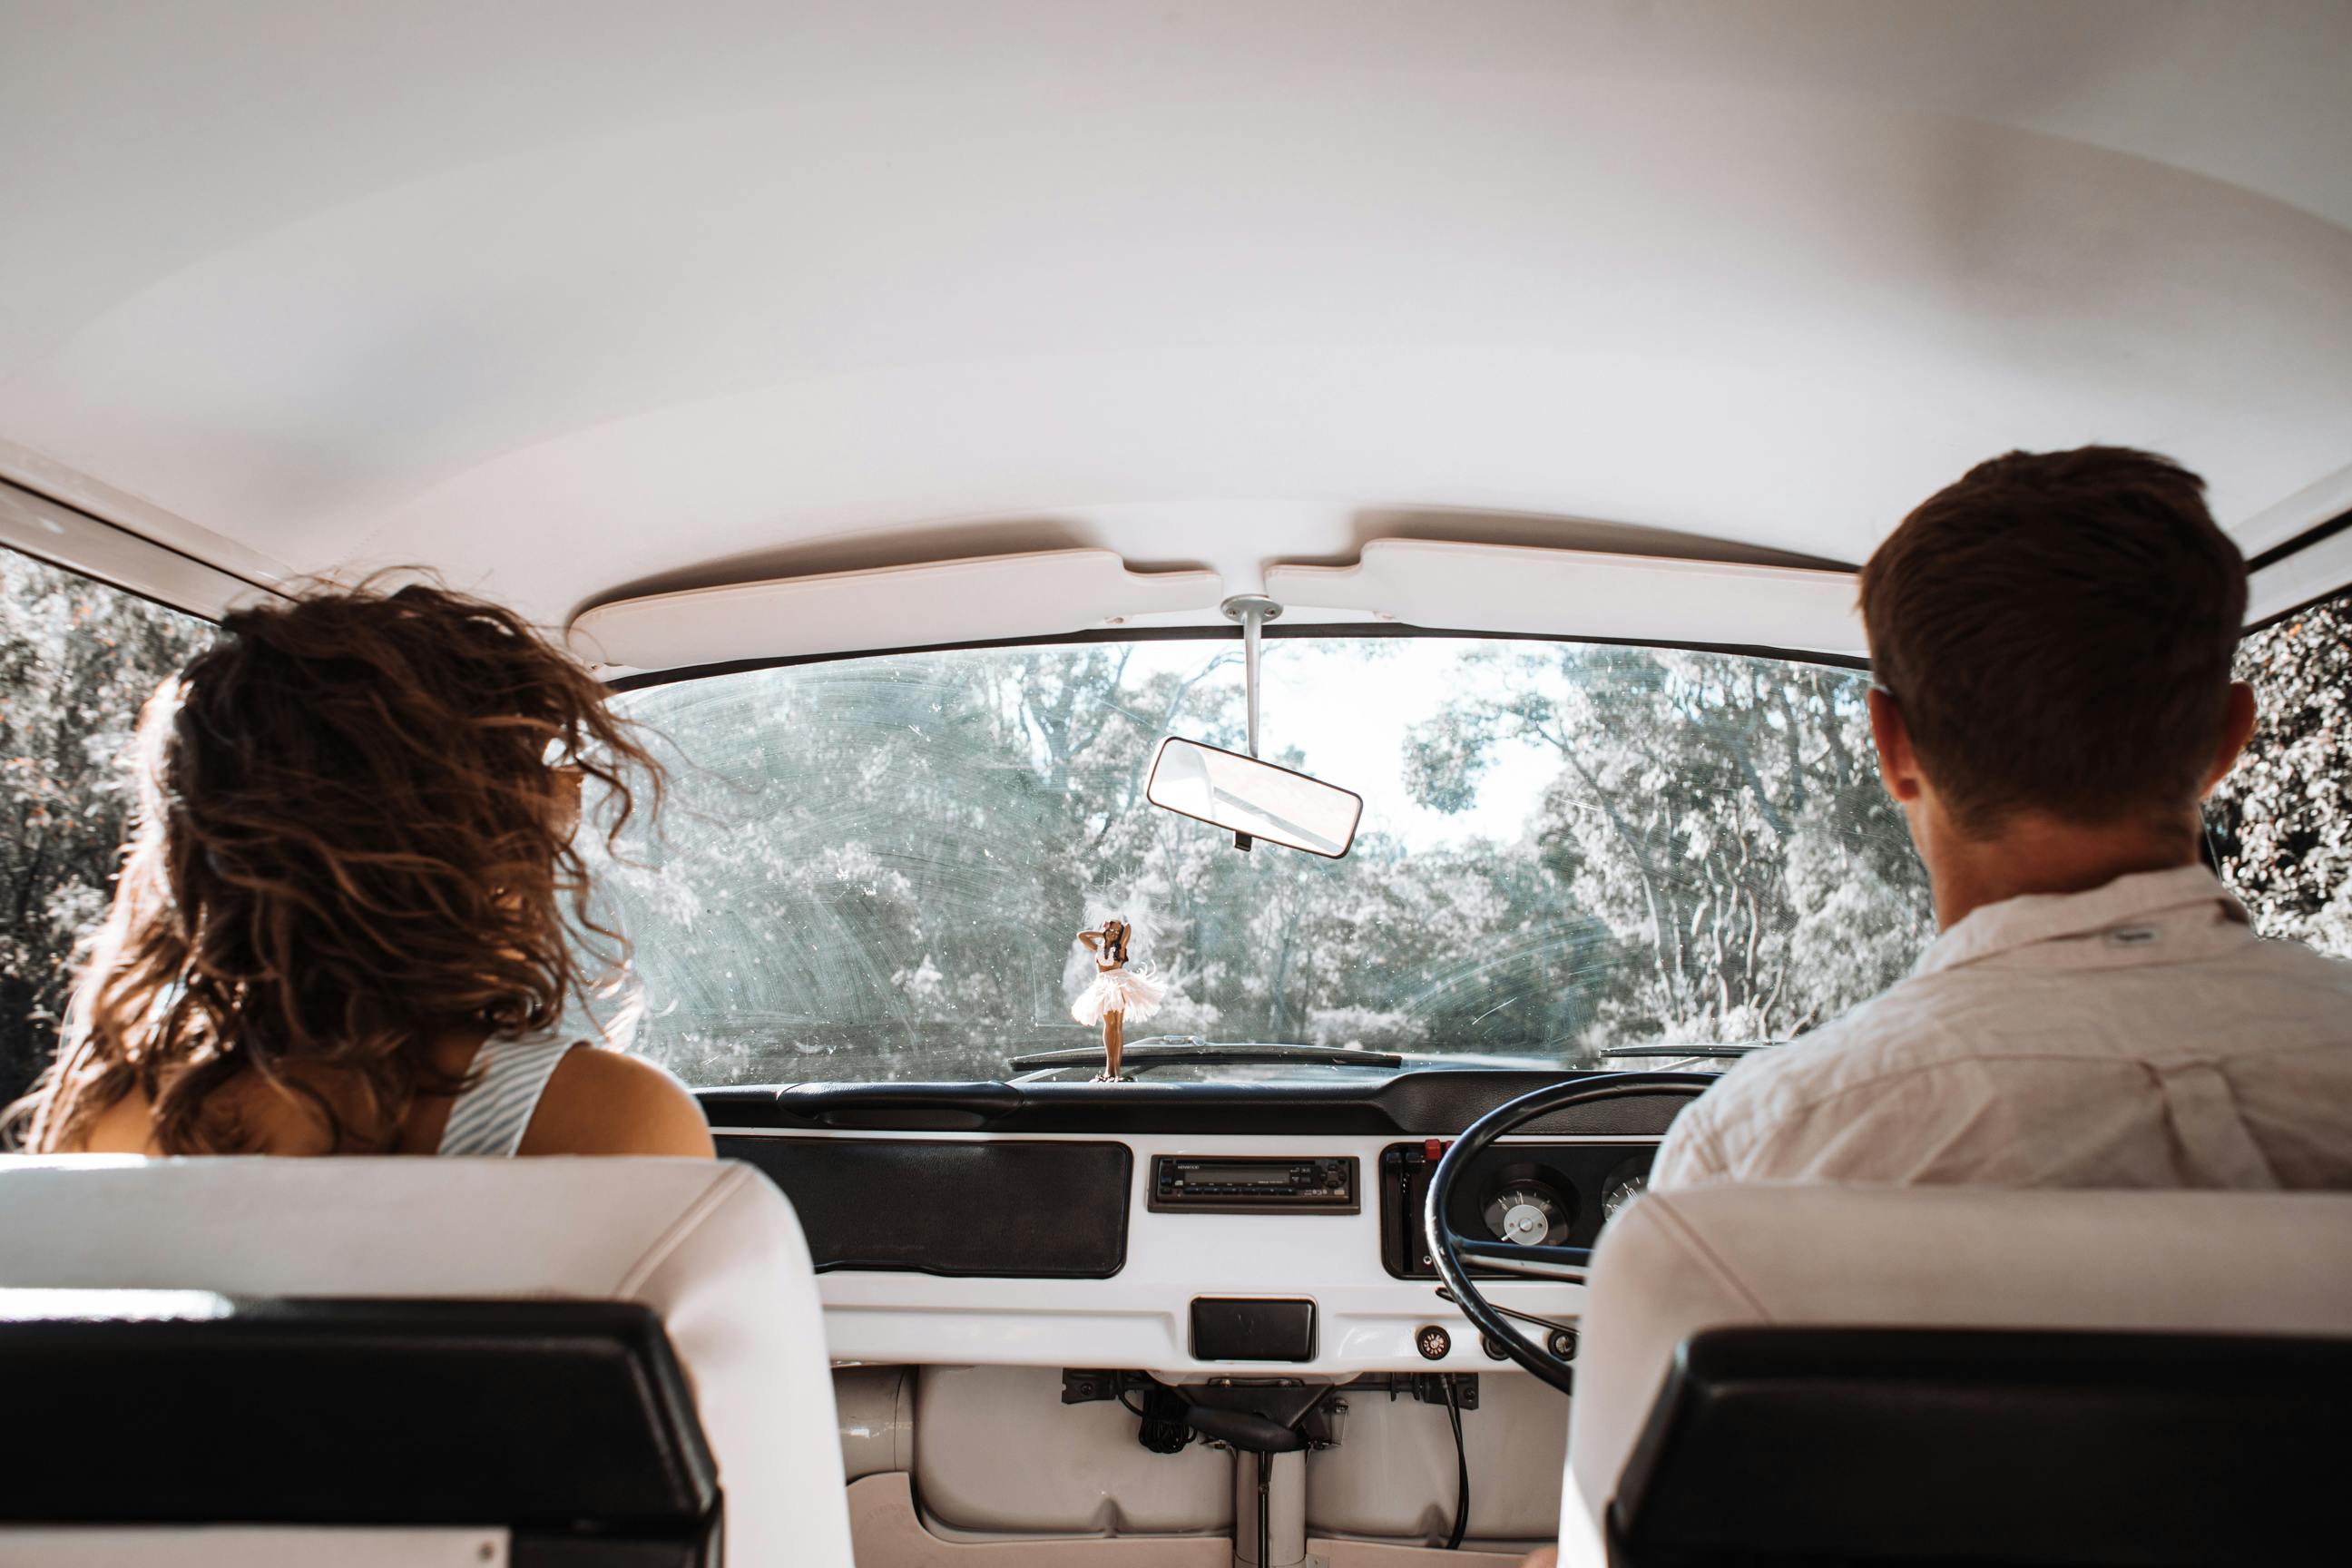 A couple driving away | Source: Pexels